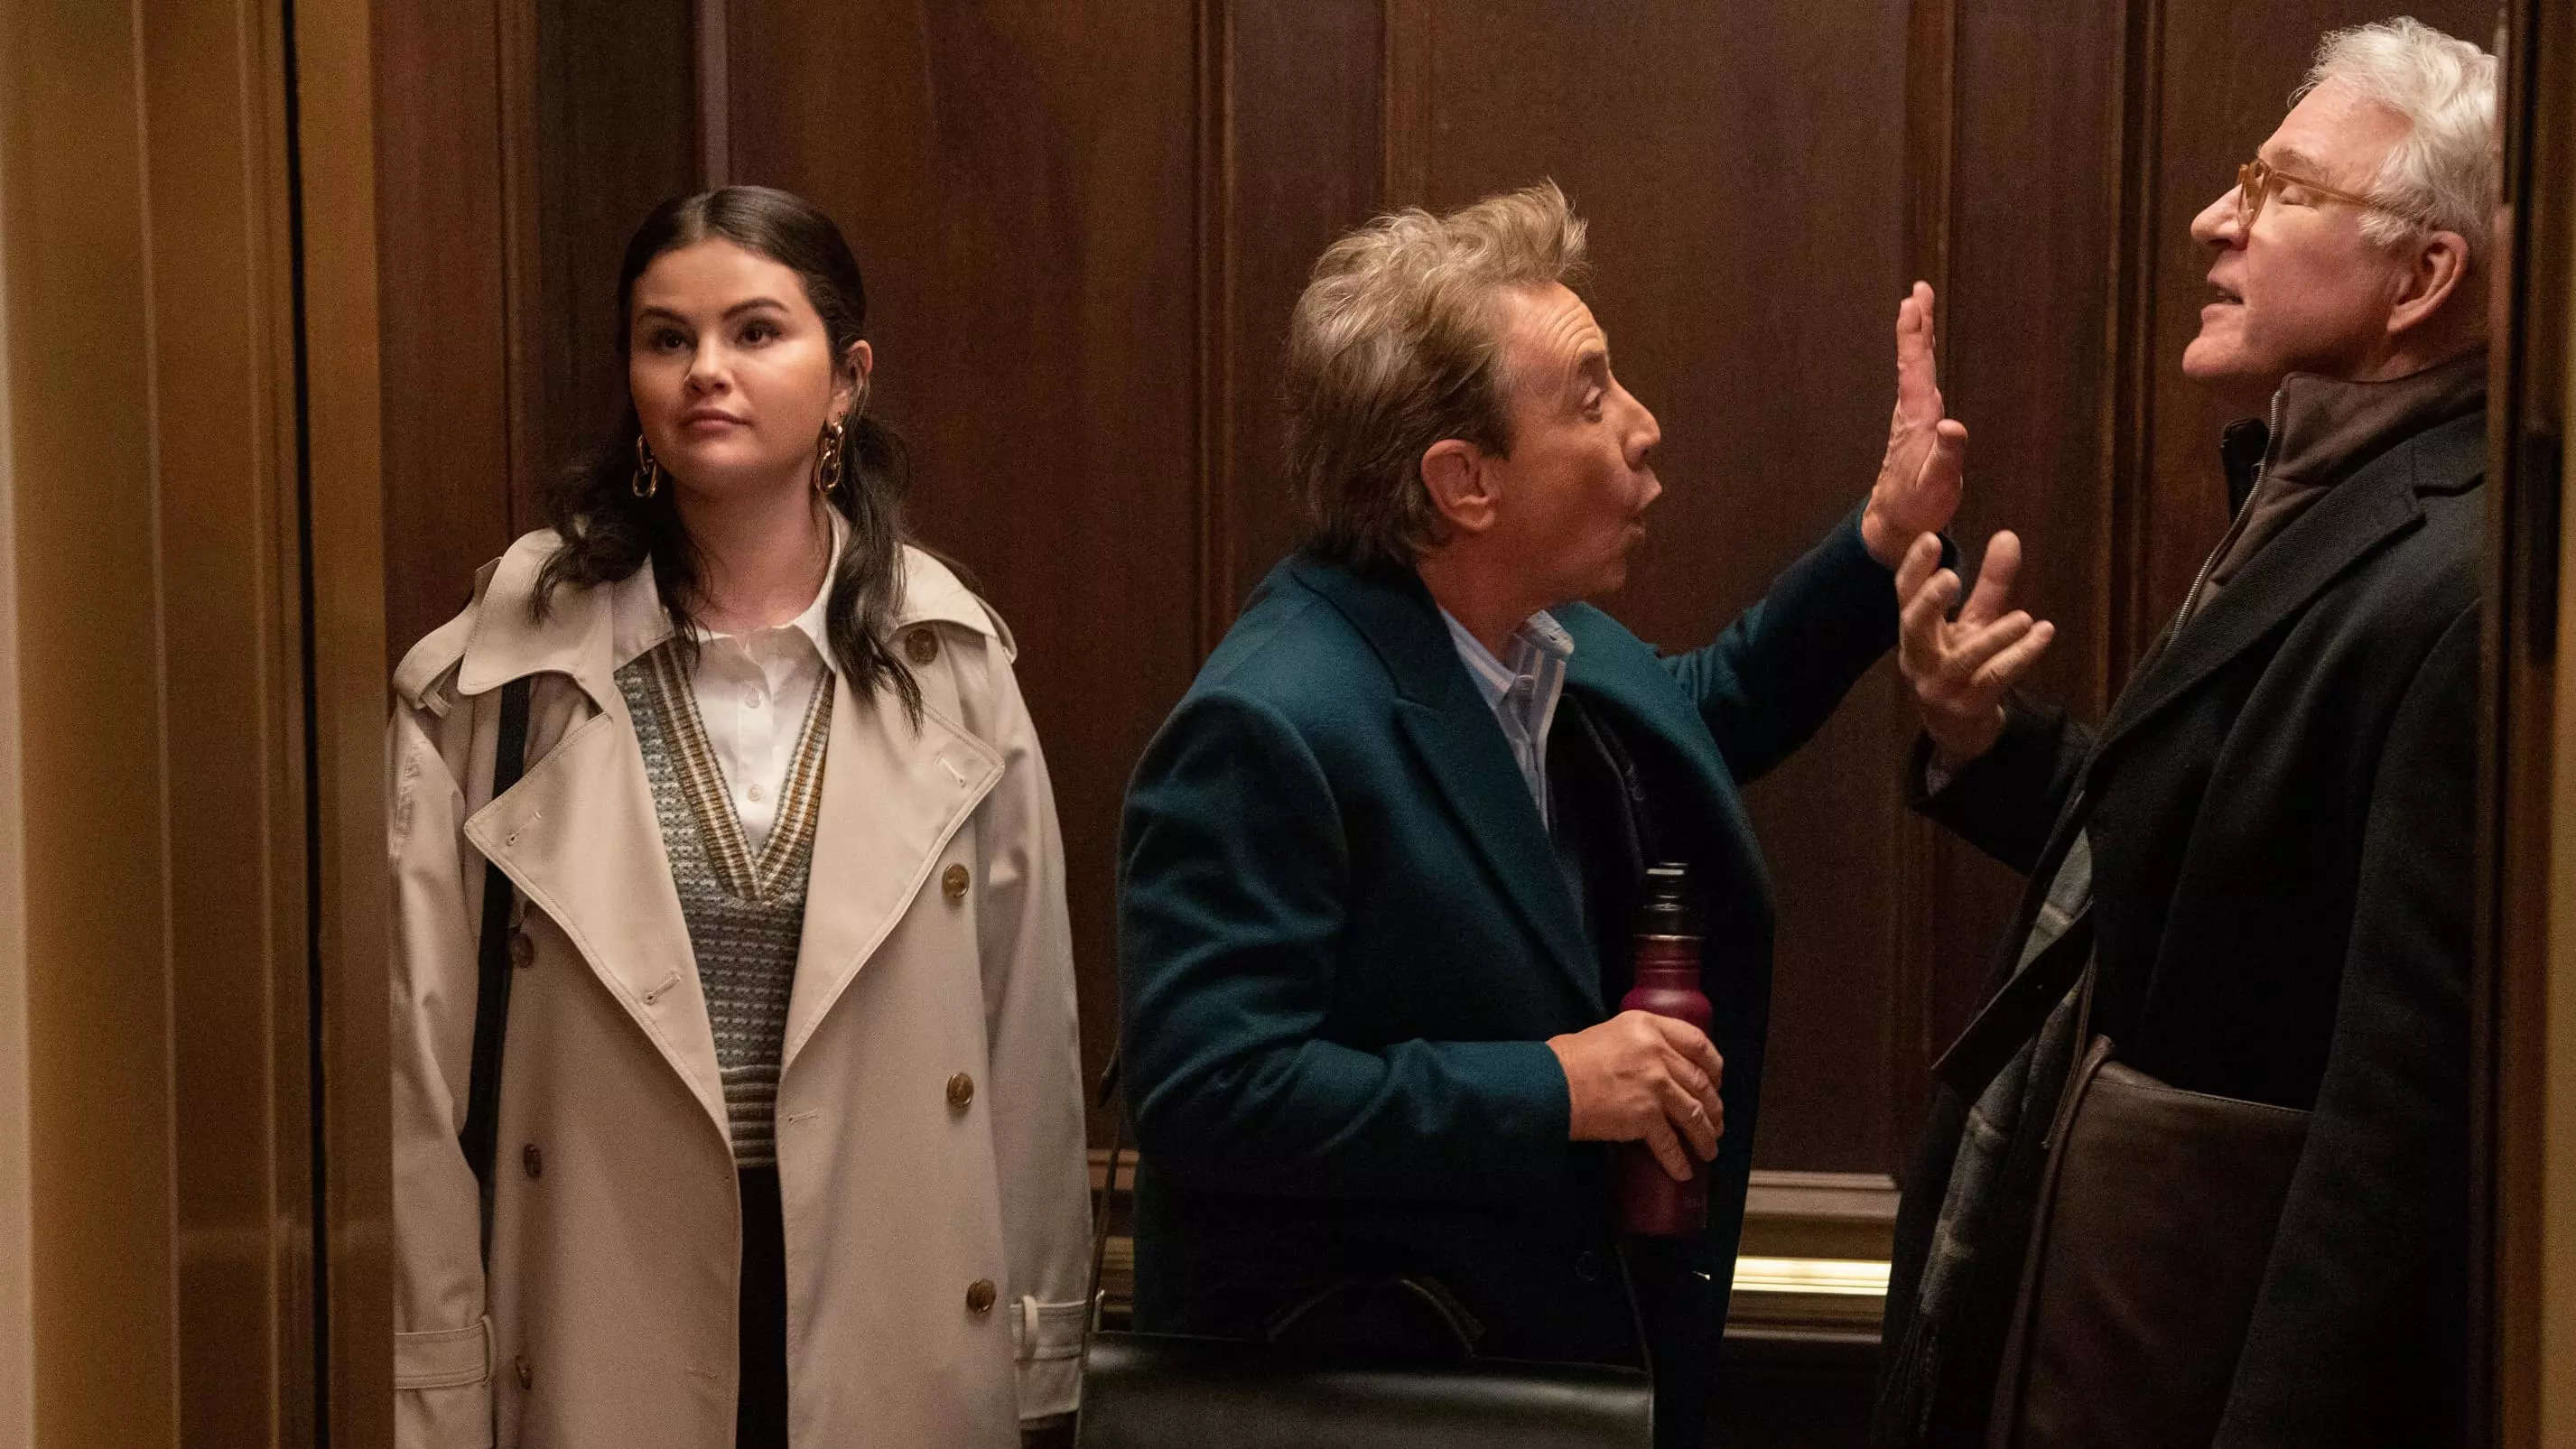 Only Murders in the Building: Selena Gomez reveals whether there will be a Season 5 